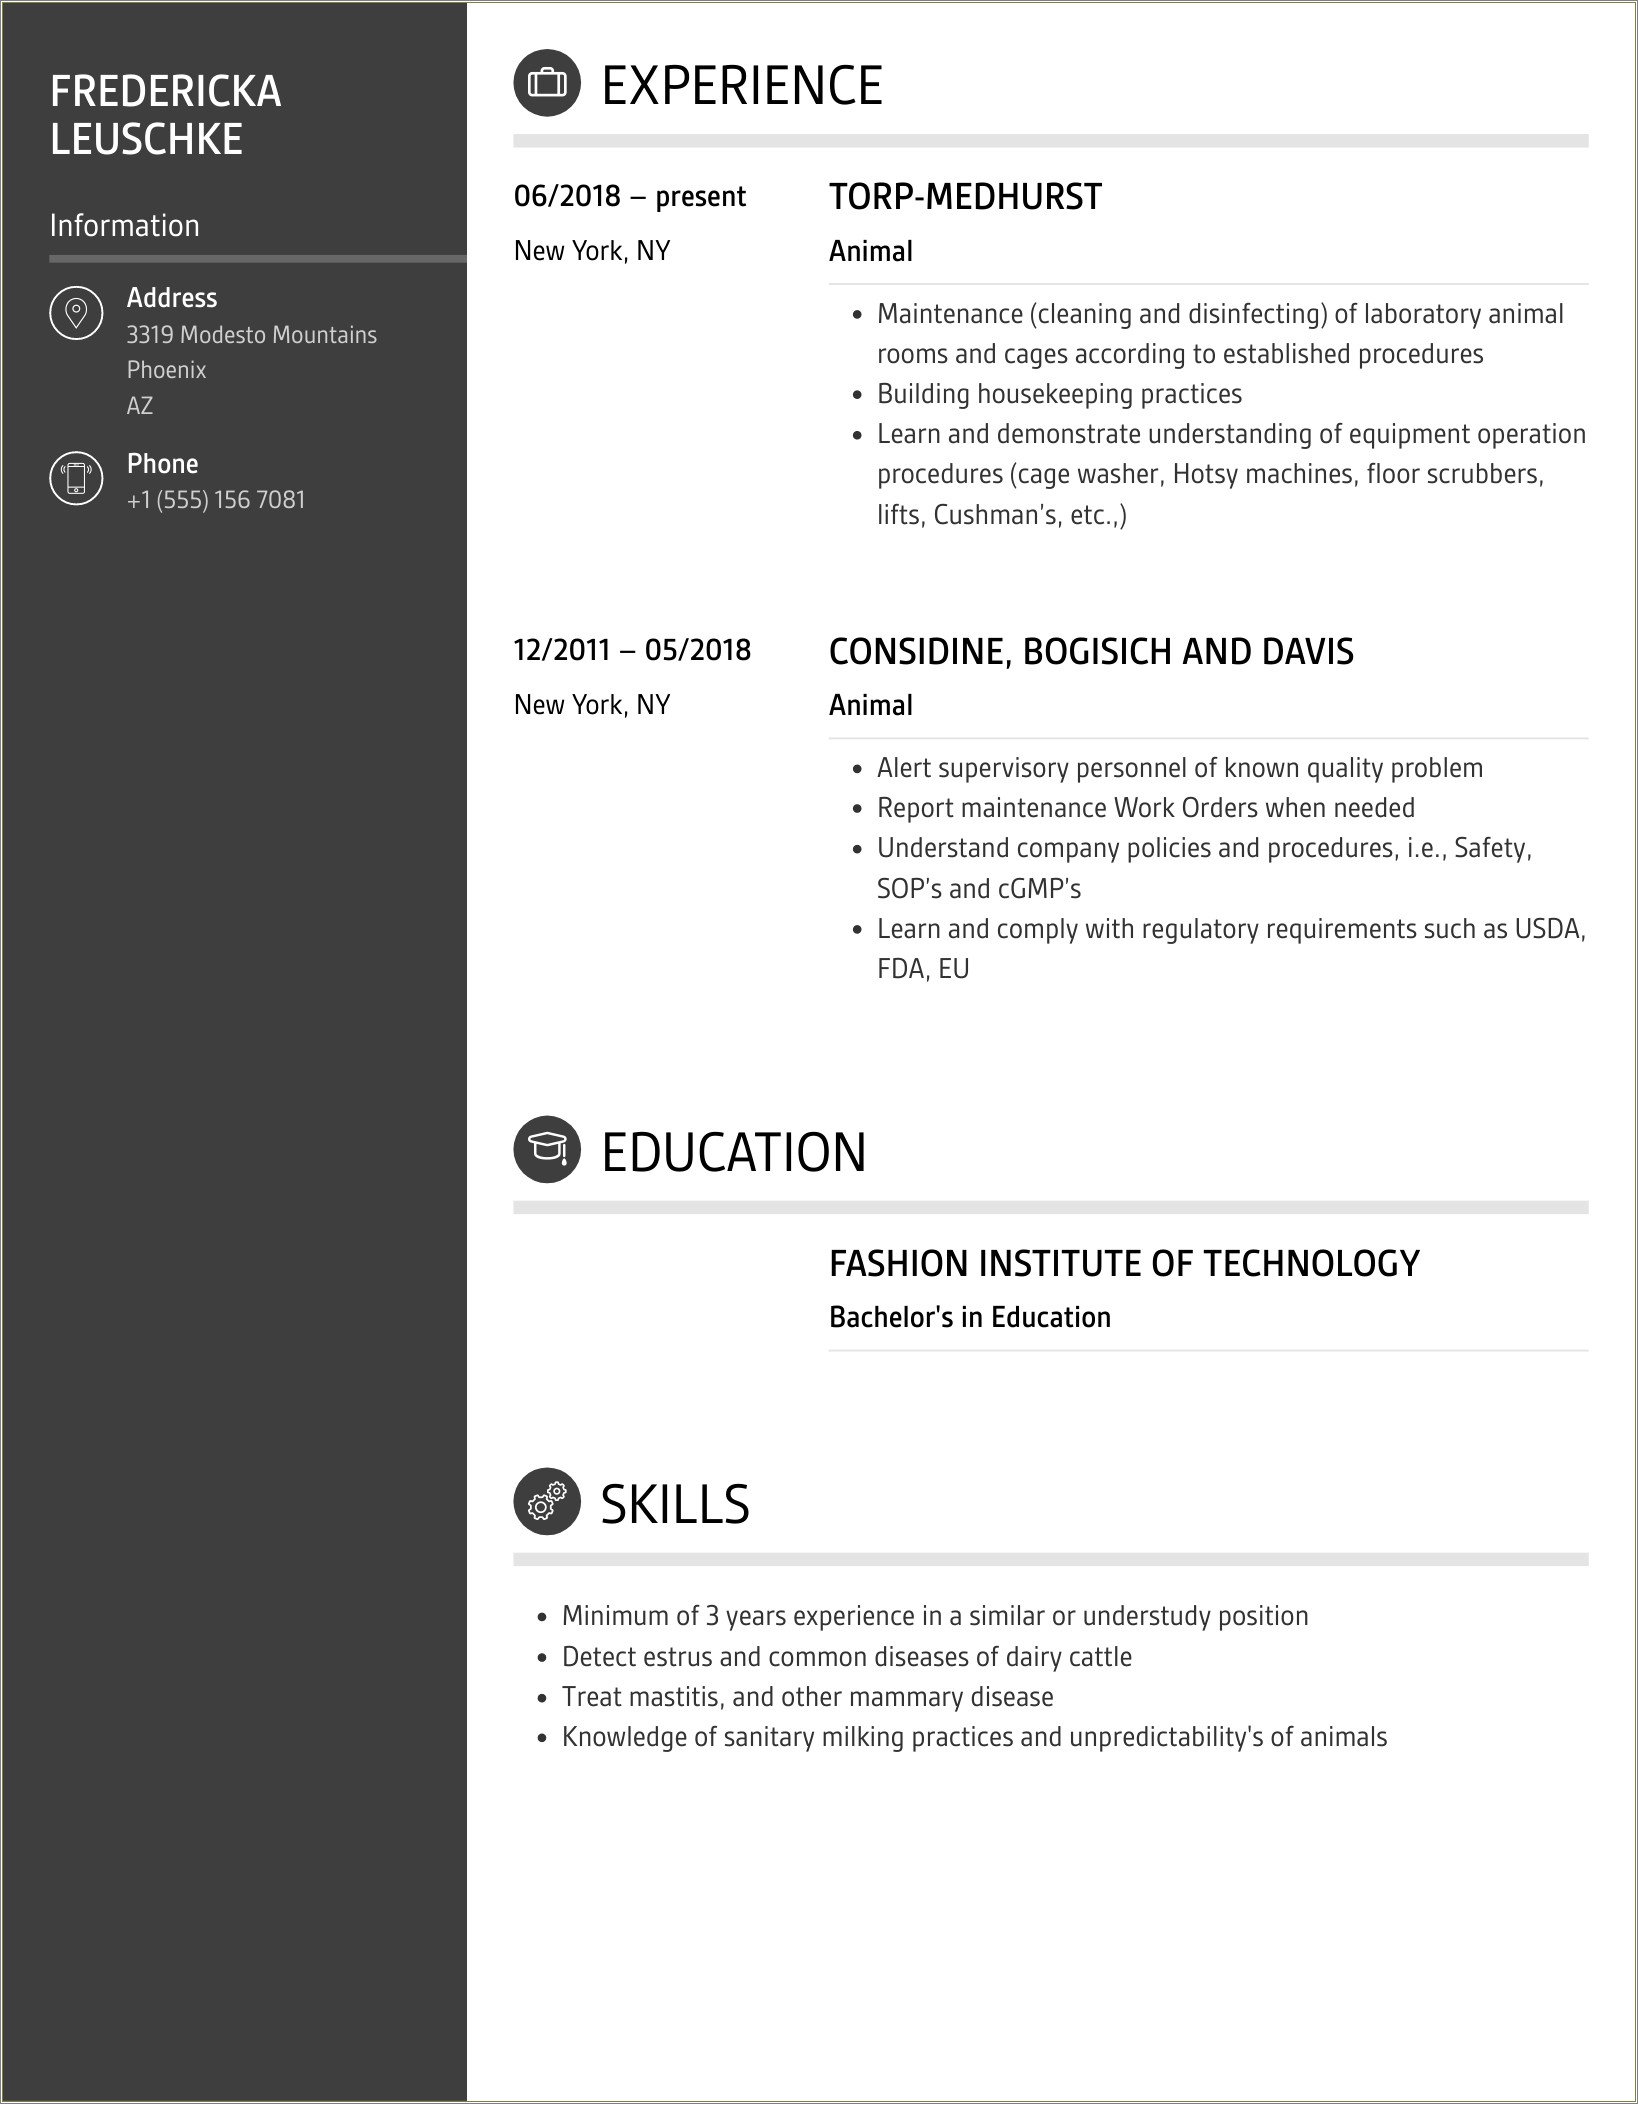 Animal Nutrition And Biotechnology Resume Samples